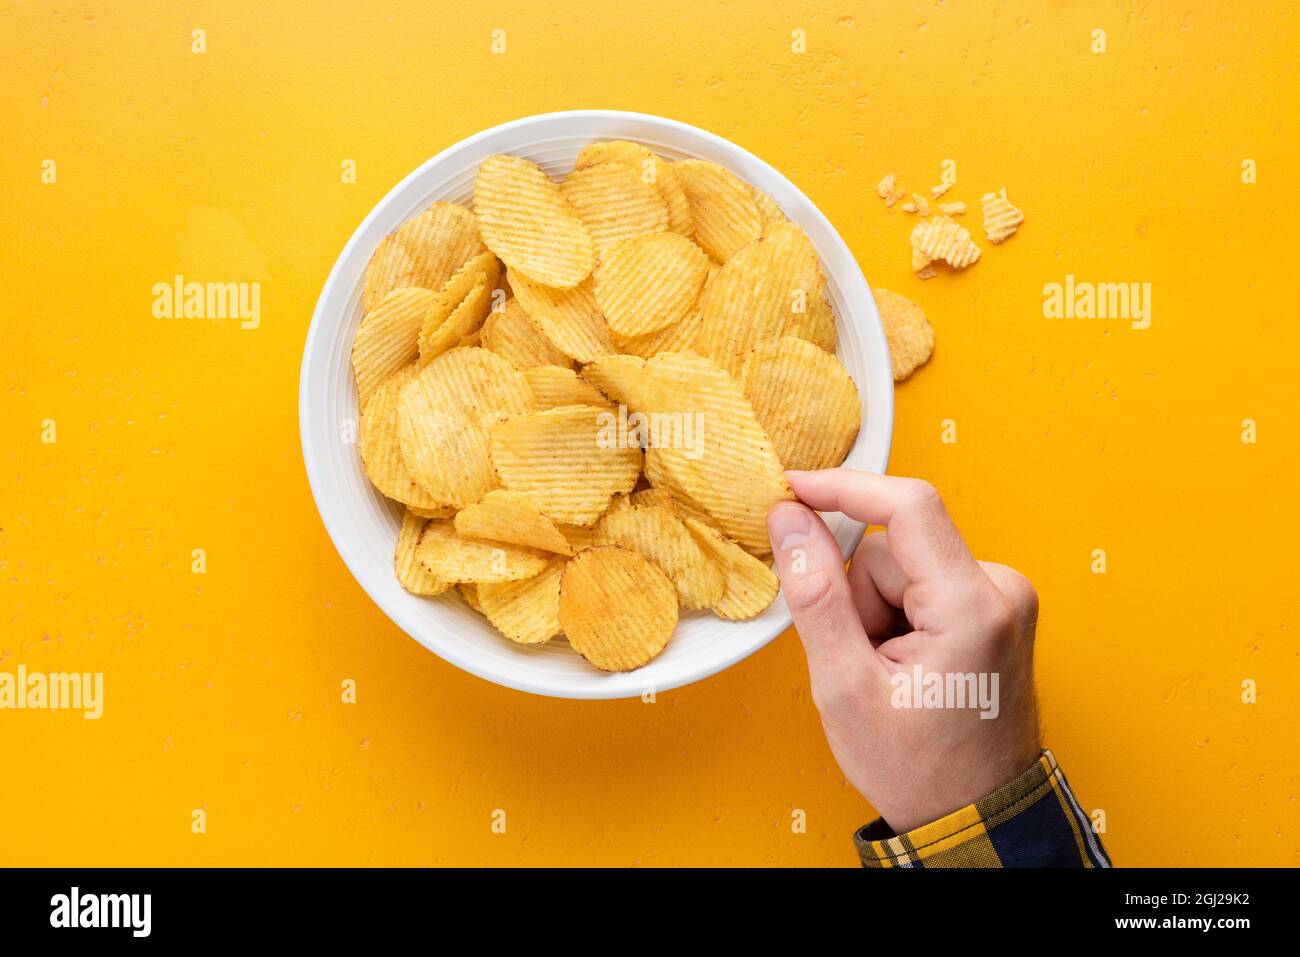 Spicy potato crisps in a bowl on yellow background. Male hand picking potato crisps. Junk food, unhealthy eating, party food concept Stock Photo